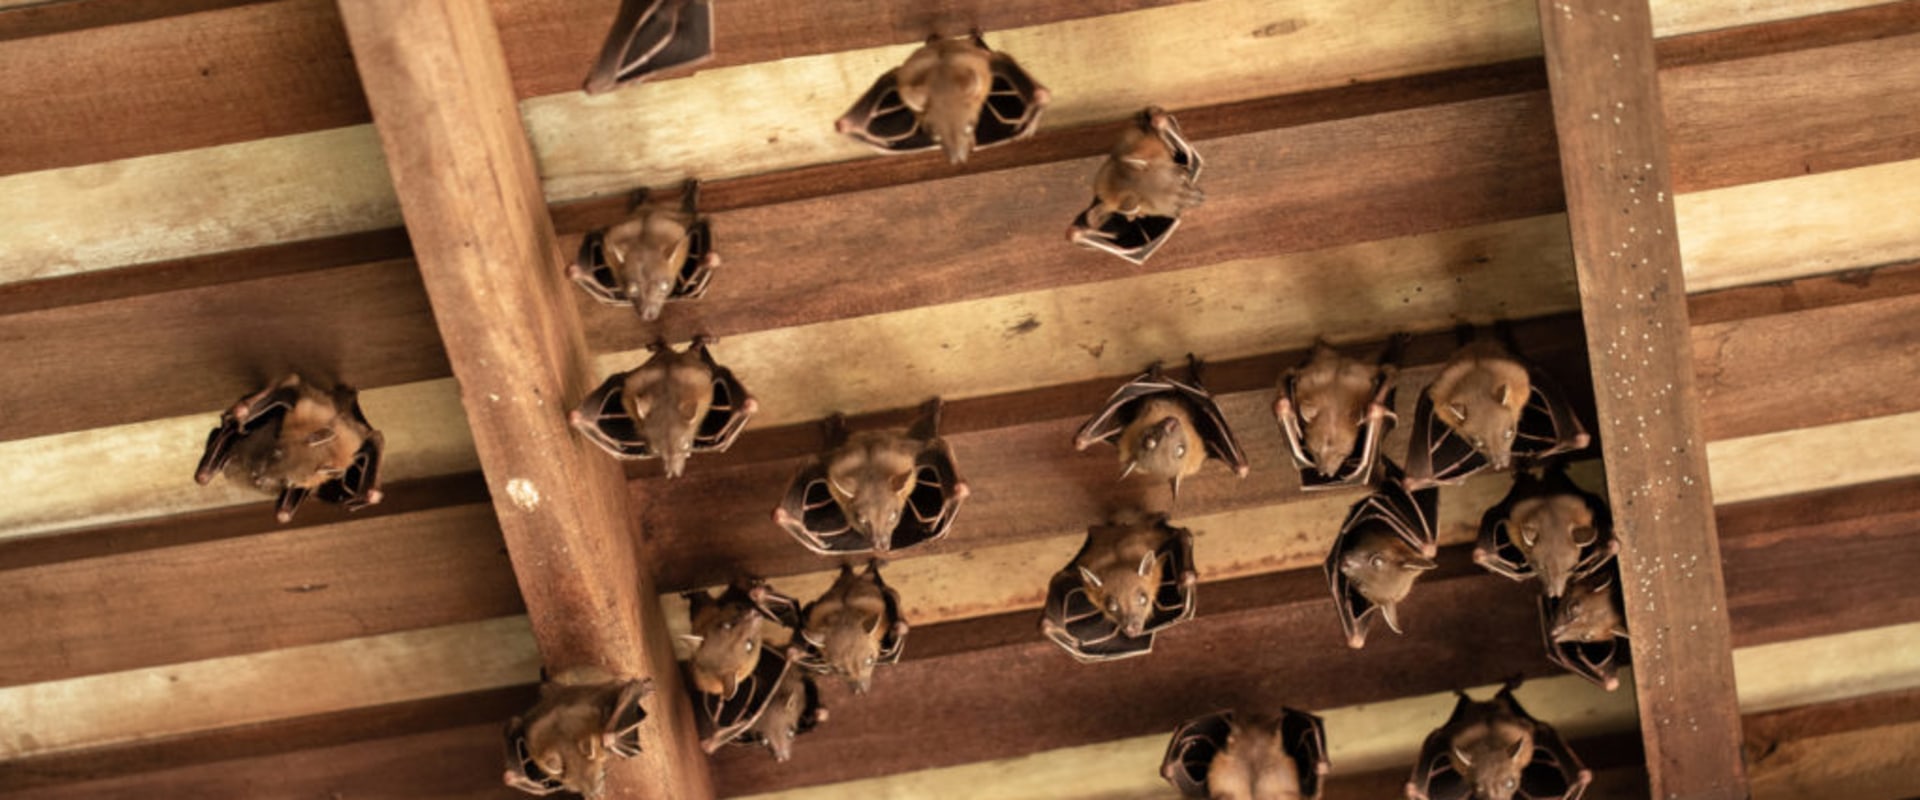 How to capture bats in the attic?